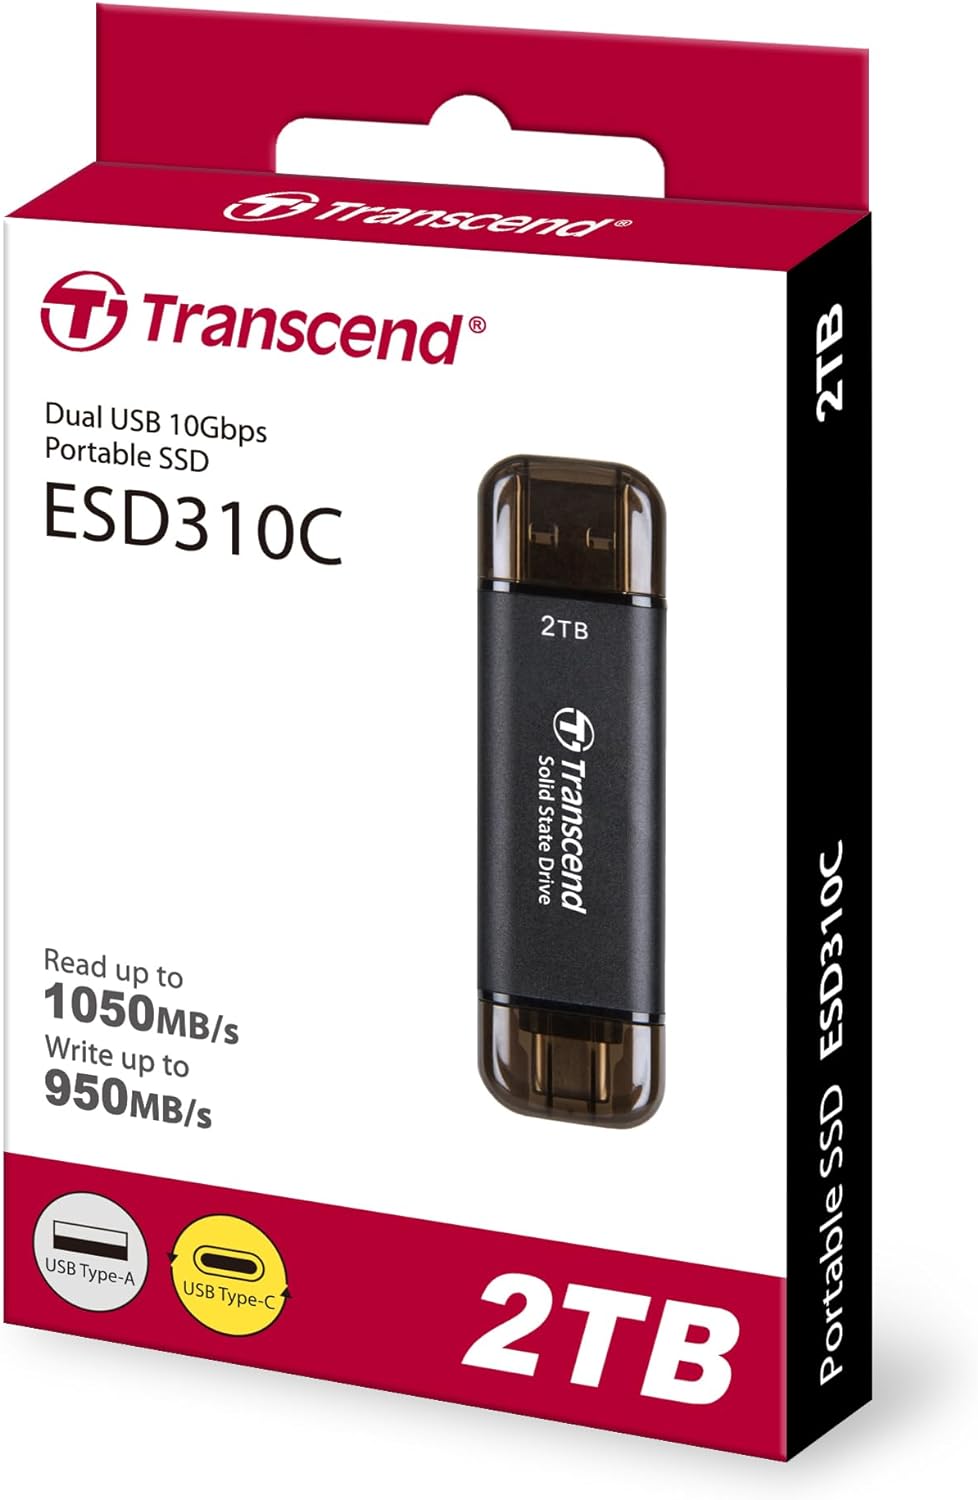 Transcend 2TB USB 10Gbps with Type-C and Type-A Portable SSD External Hard Drive (Brand New)